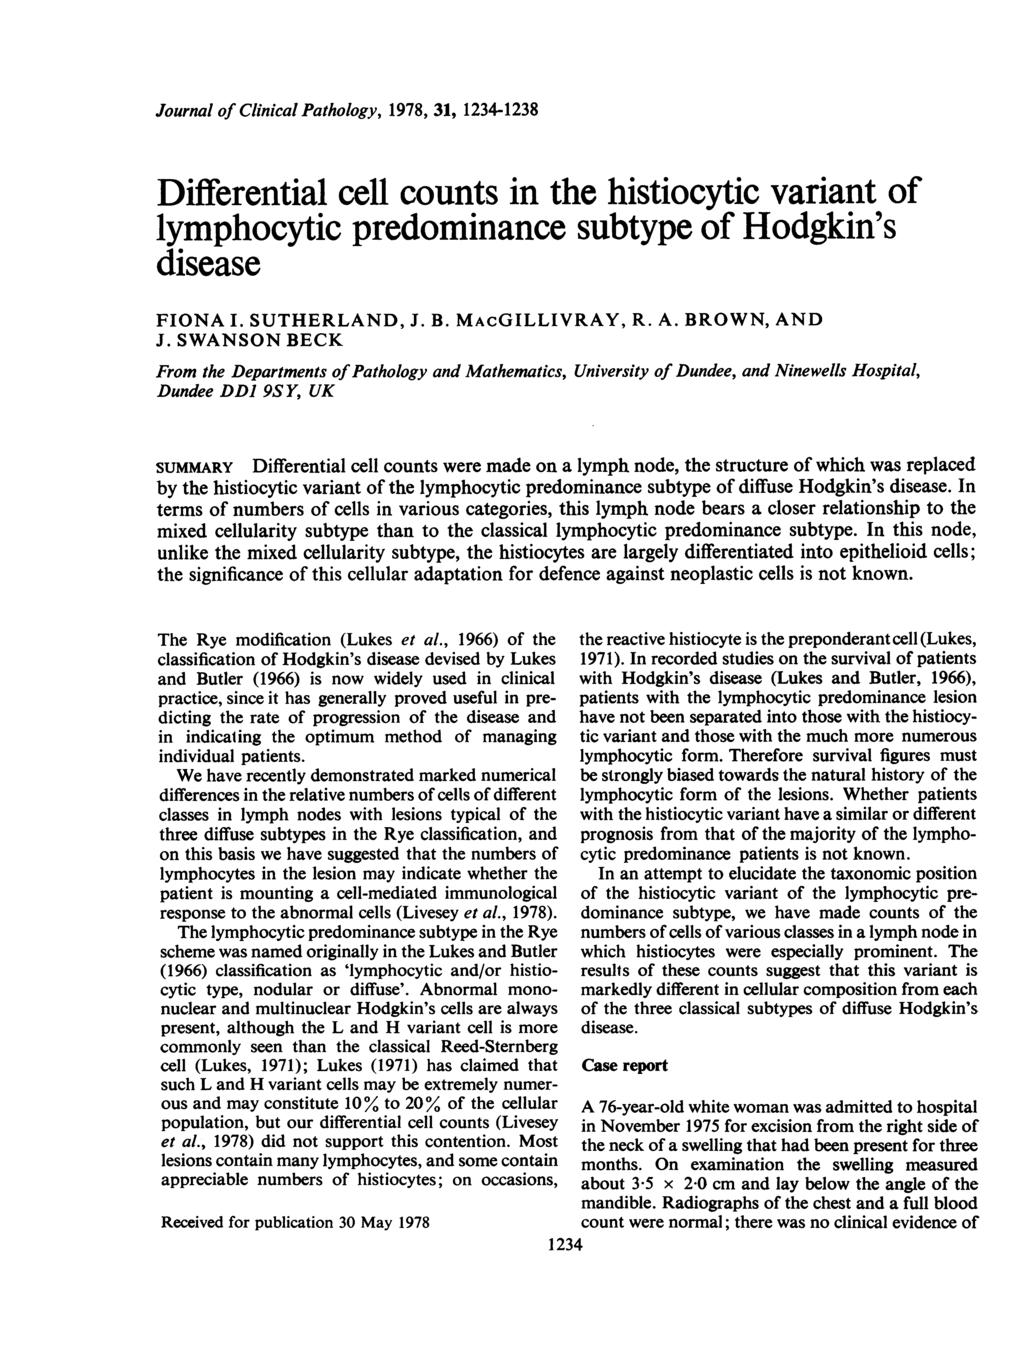 Journal of Clinical Pathology, 1978, 31, 1234-1238 Differential cell counts in the histiocytic variant of lymphocytic predominance subtype of Hodgkin's disease FIONA I. SUTHERLAND, J. B.